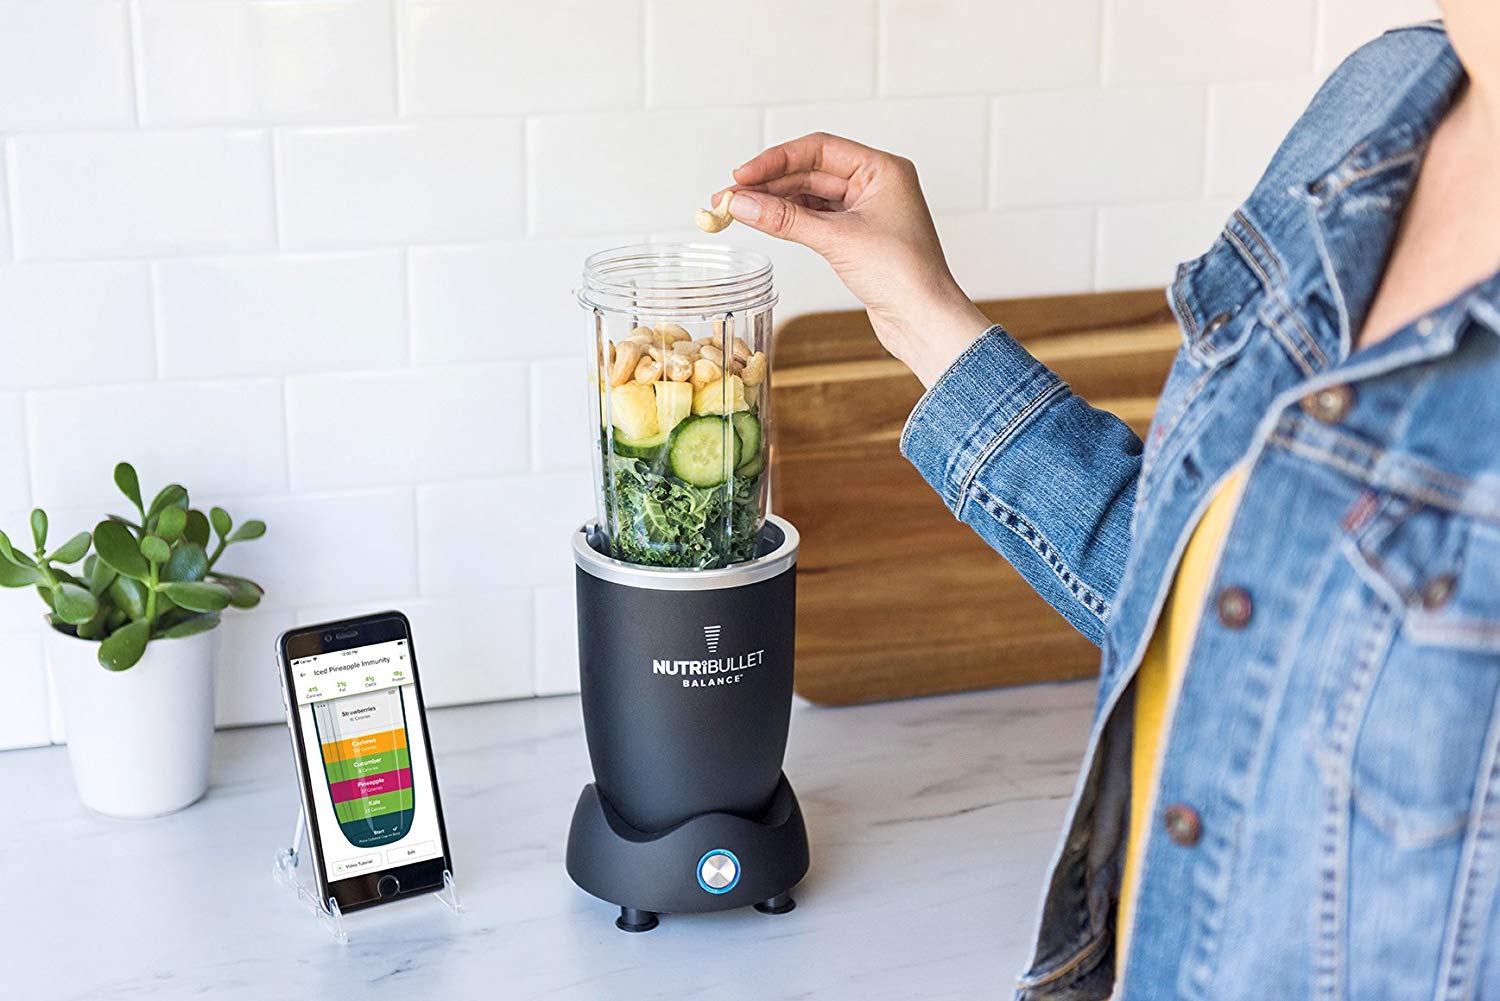 Top 10 Best Personal Blender for Shakes and Smoothies in 2020